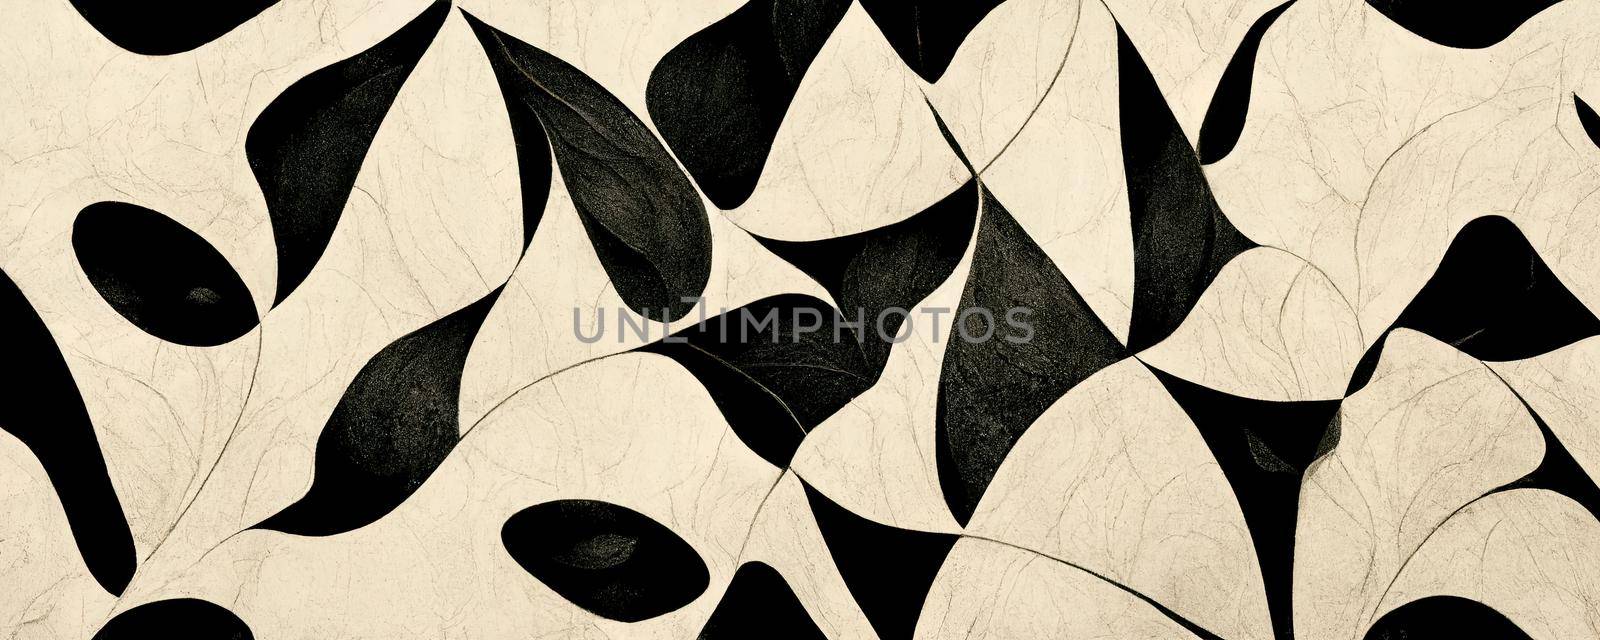 warm white fabric with black pattern,Colorful abstract wallpaper texture background illustration by TRMK